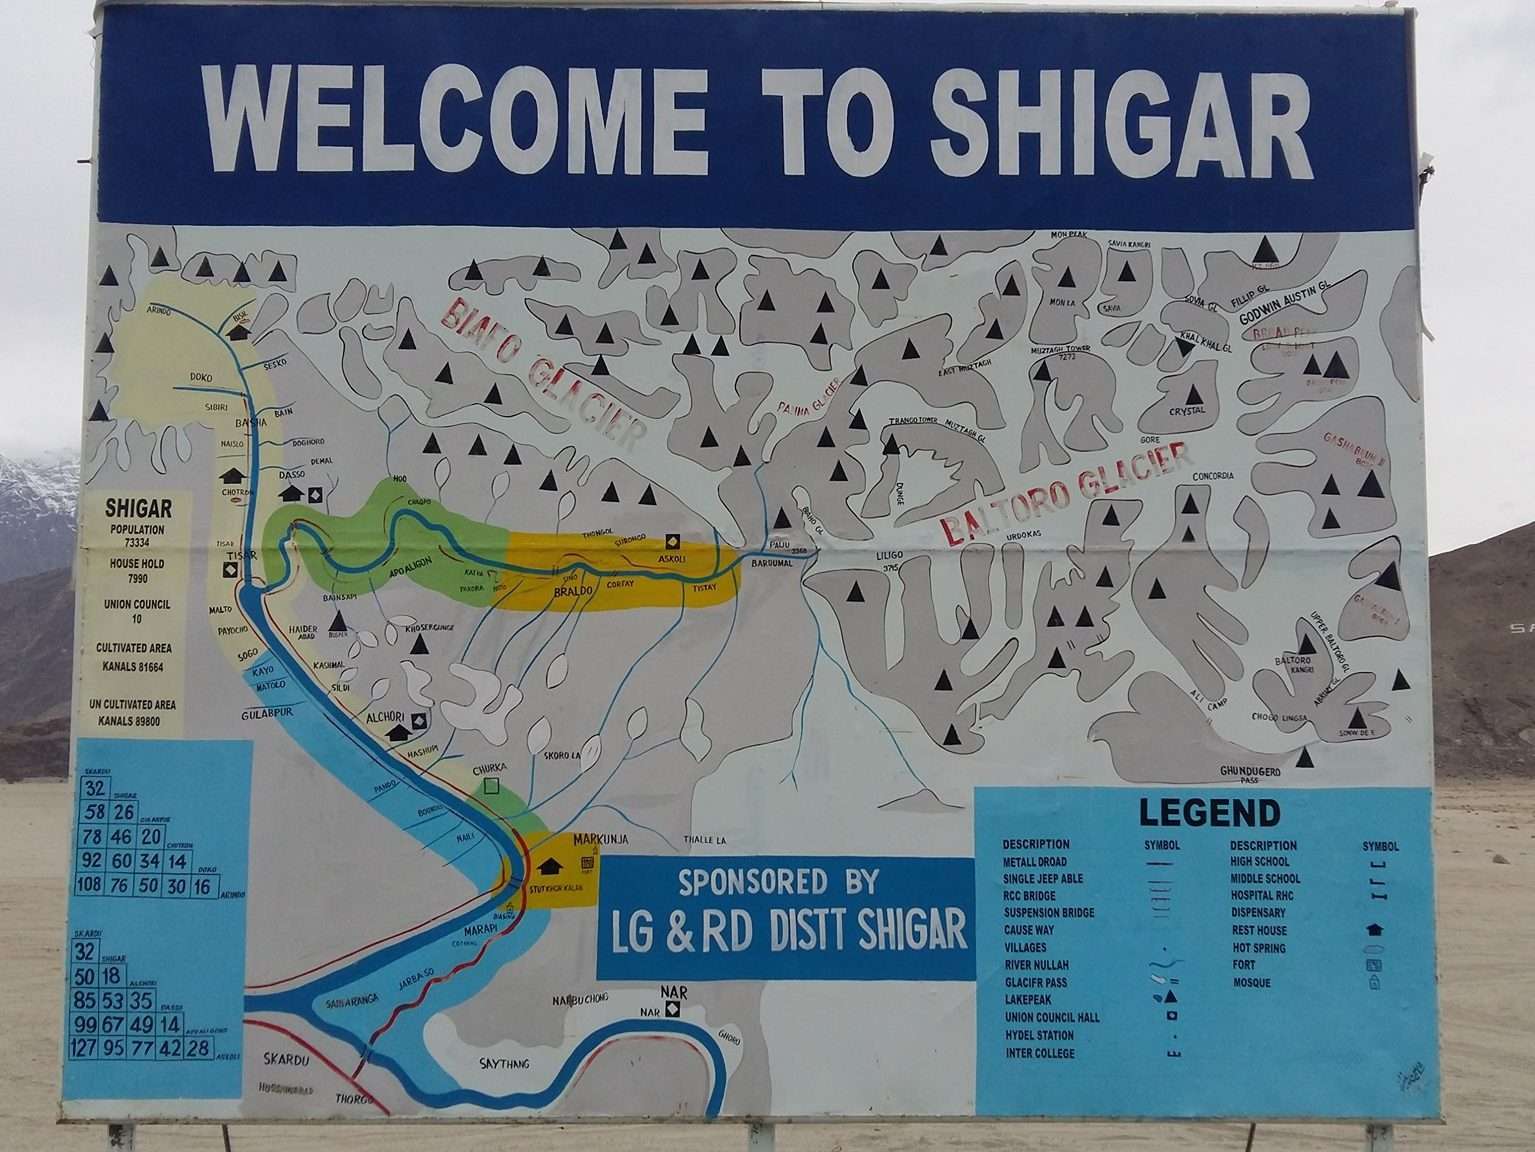 Shigar Tourist Map
Best time to Travel Pakistan. 
When Should I travel to Pakistan?